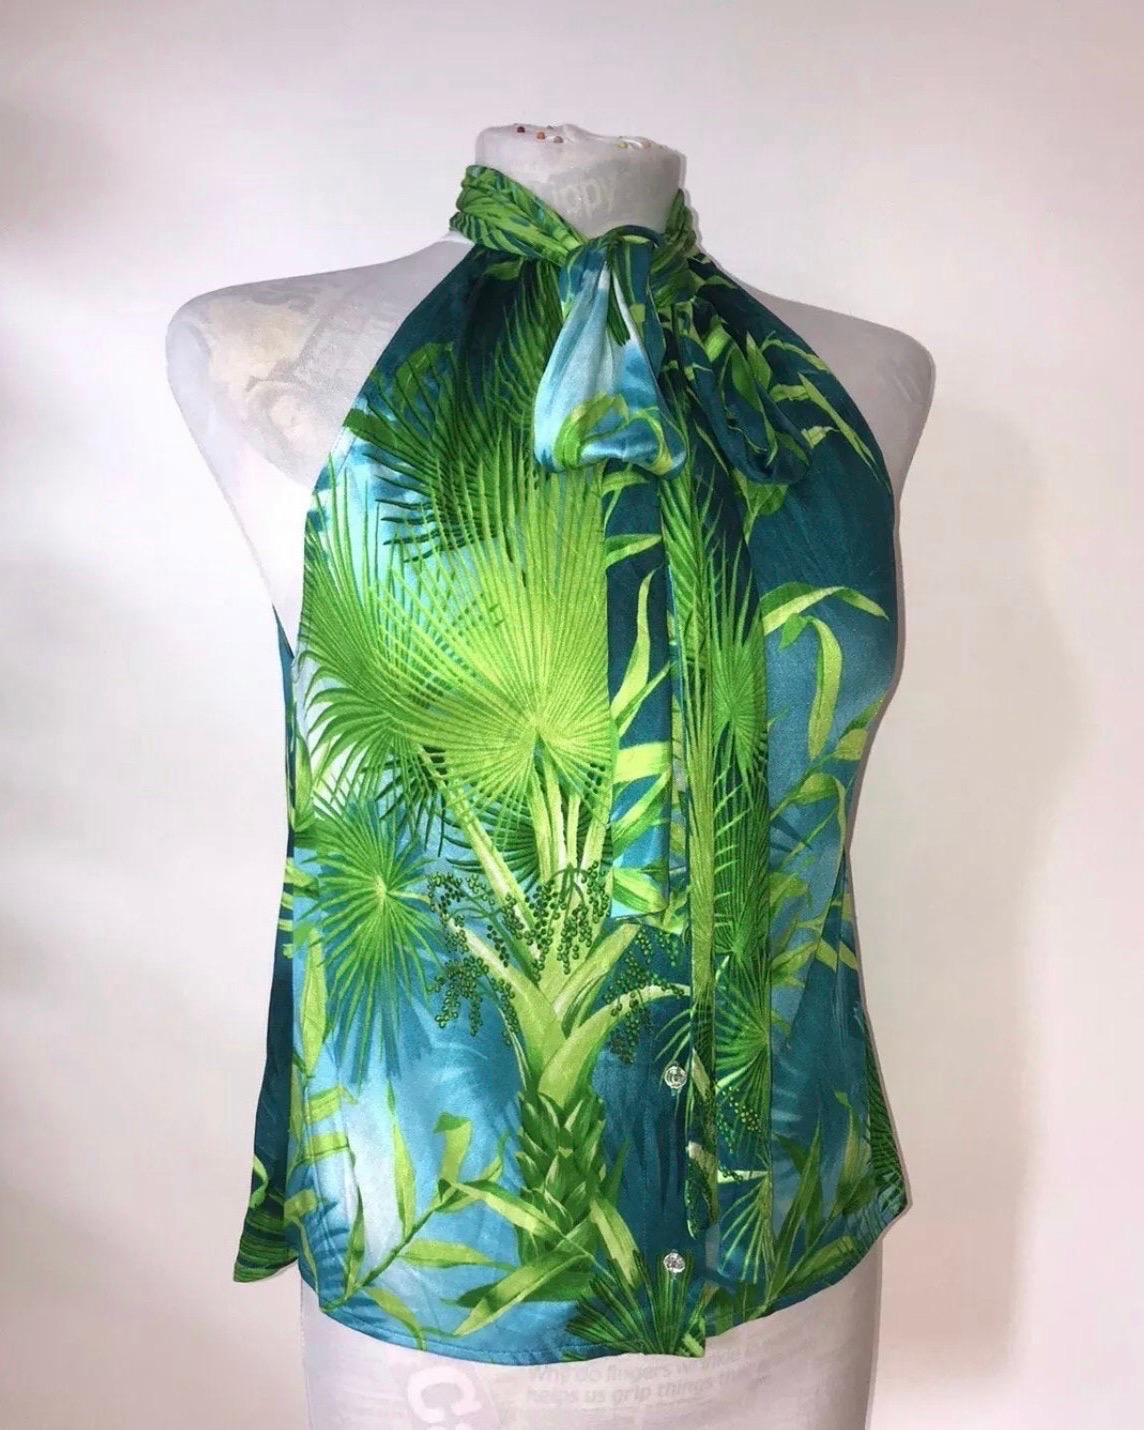 Vintage Gianni Versace Jungle Print Versace Halter Top from S/S 2000 For Sale 2